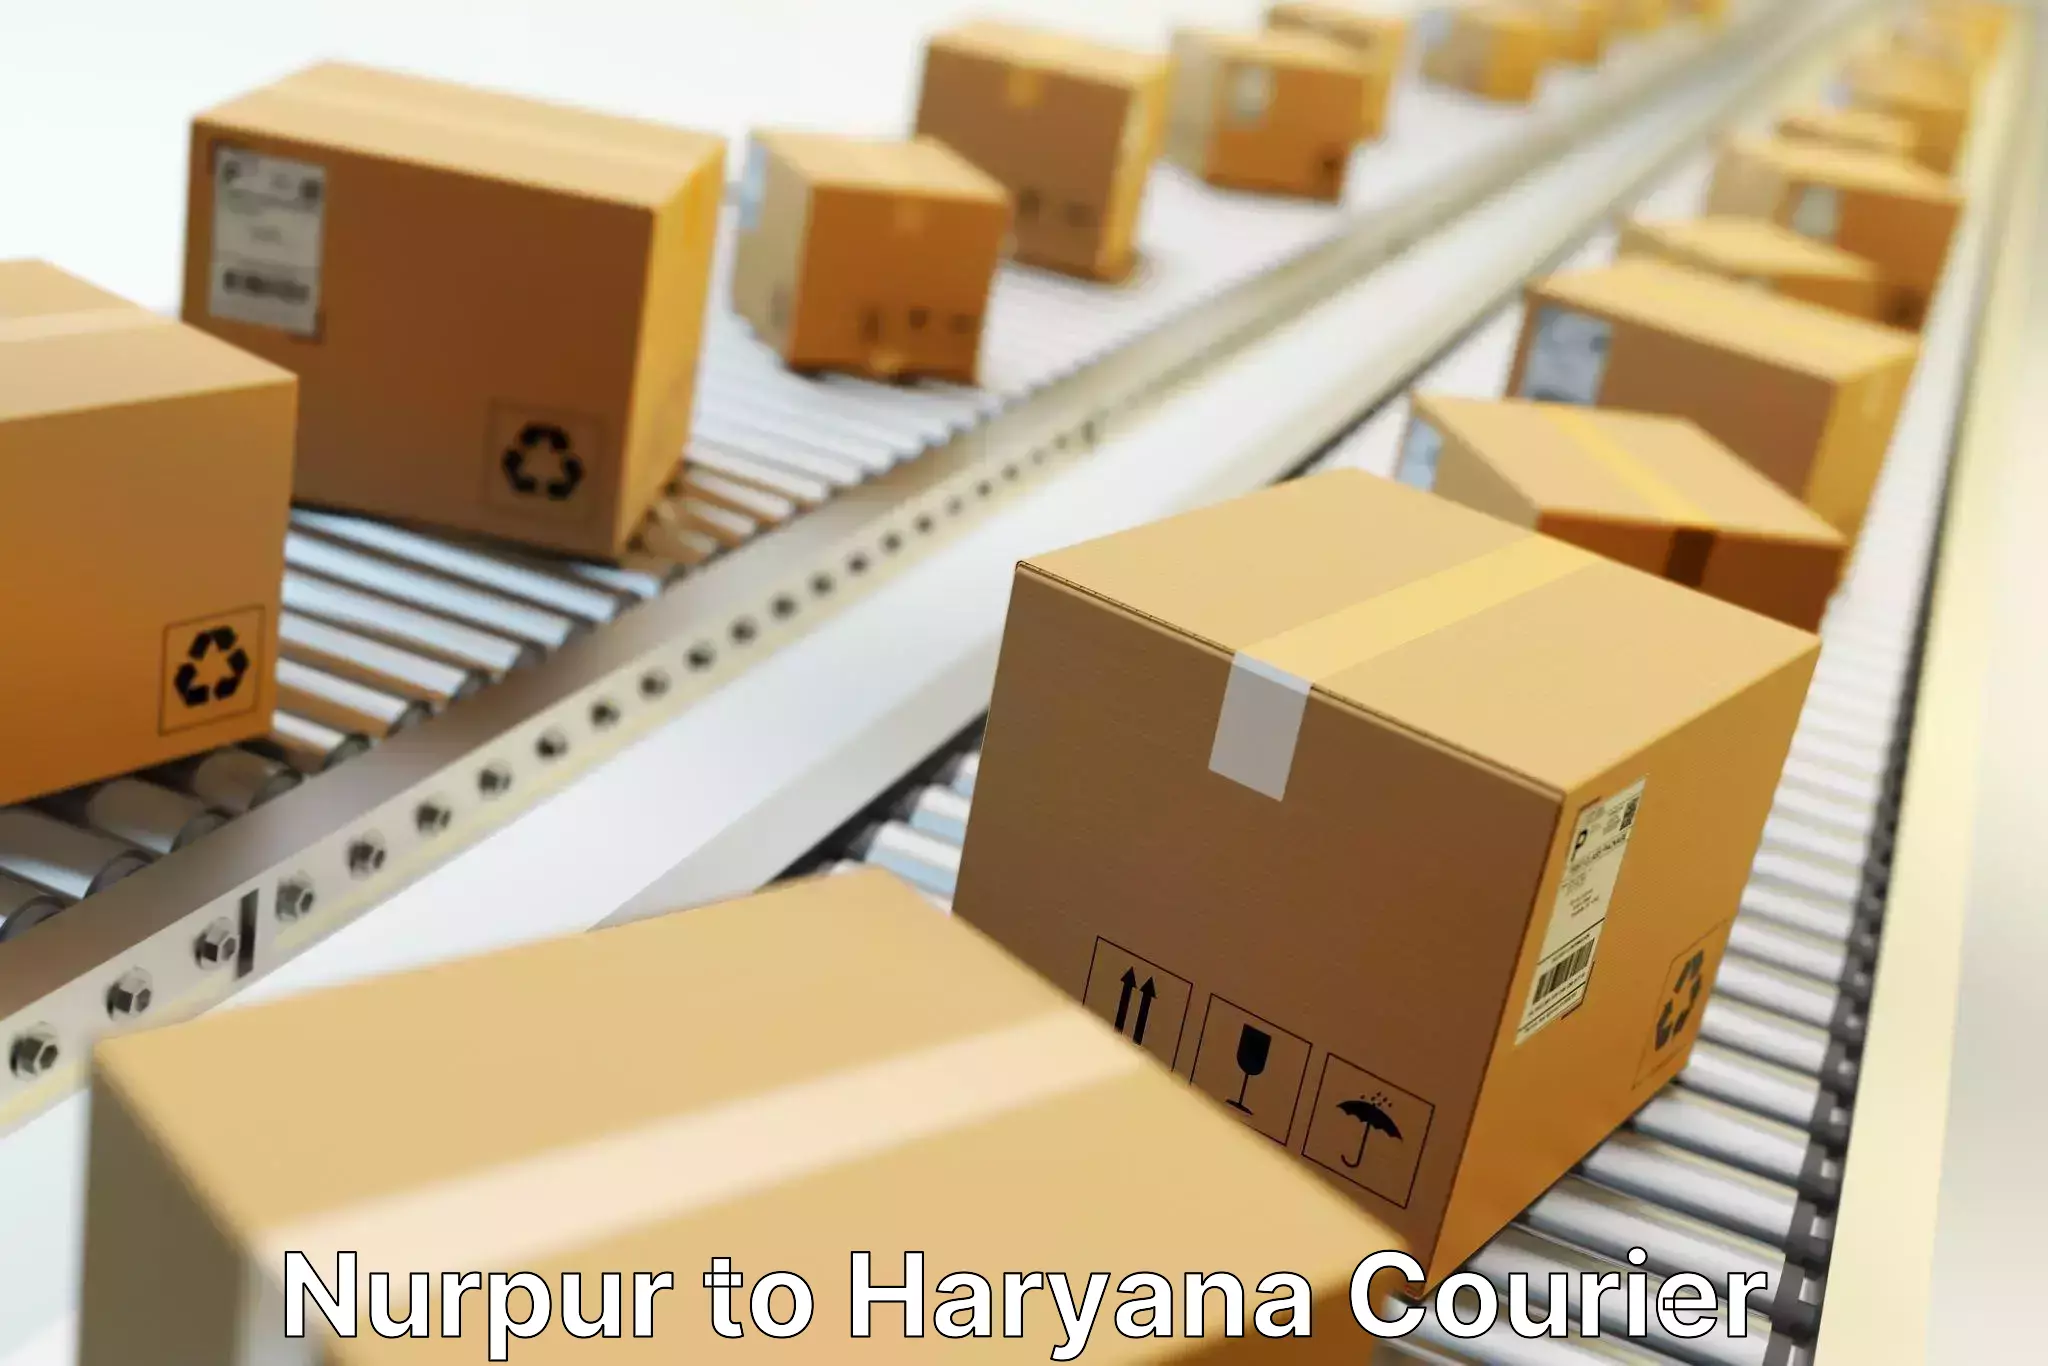 Cost-effective courier options Nurpur to NCR Haryana